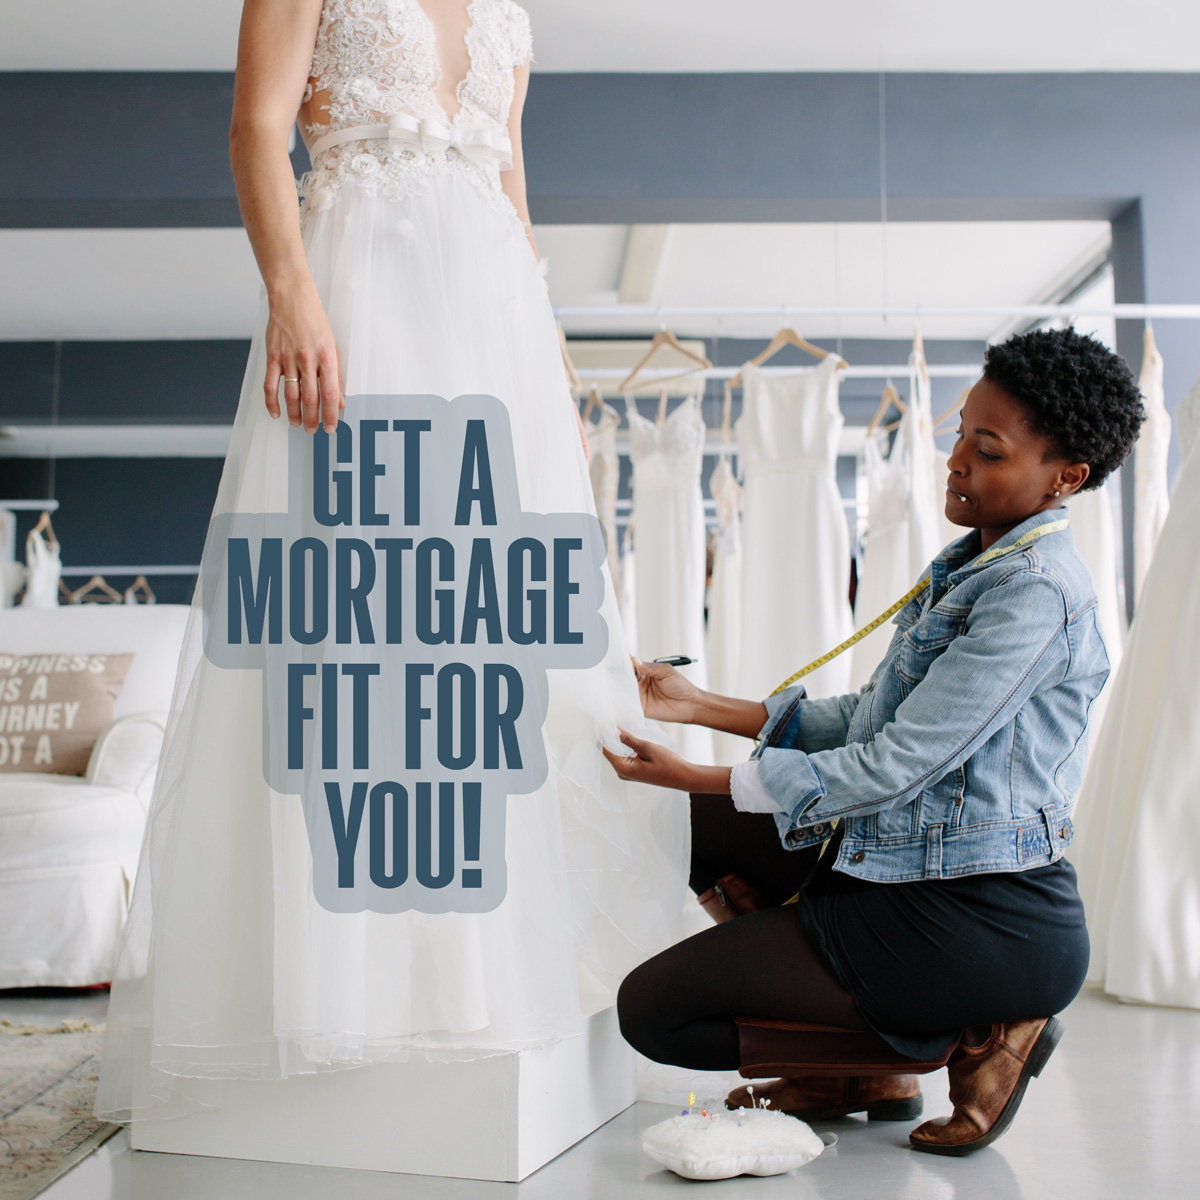 Finding the perfect fit isn’t easy when you buy off the rack. That’s why I work with multiple lenders to find a loan that is perfectly tailored just for you. Call today to learn more.808-500-6655 #mortgageloanofficer #mortgagebroker #realestate #knowyouroptions #mortgage